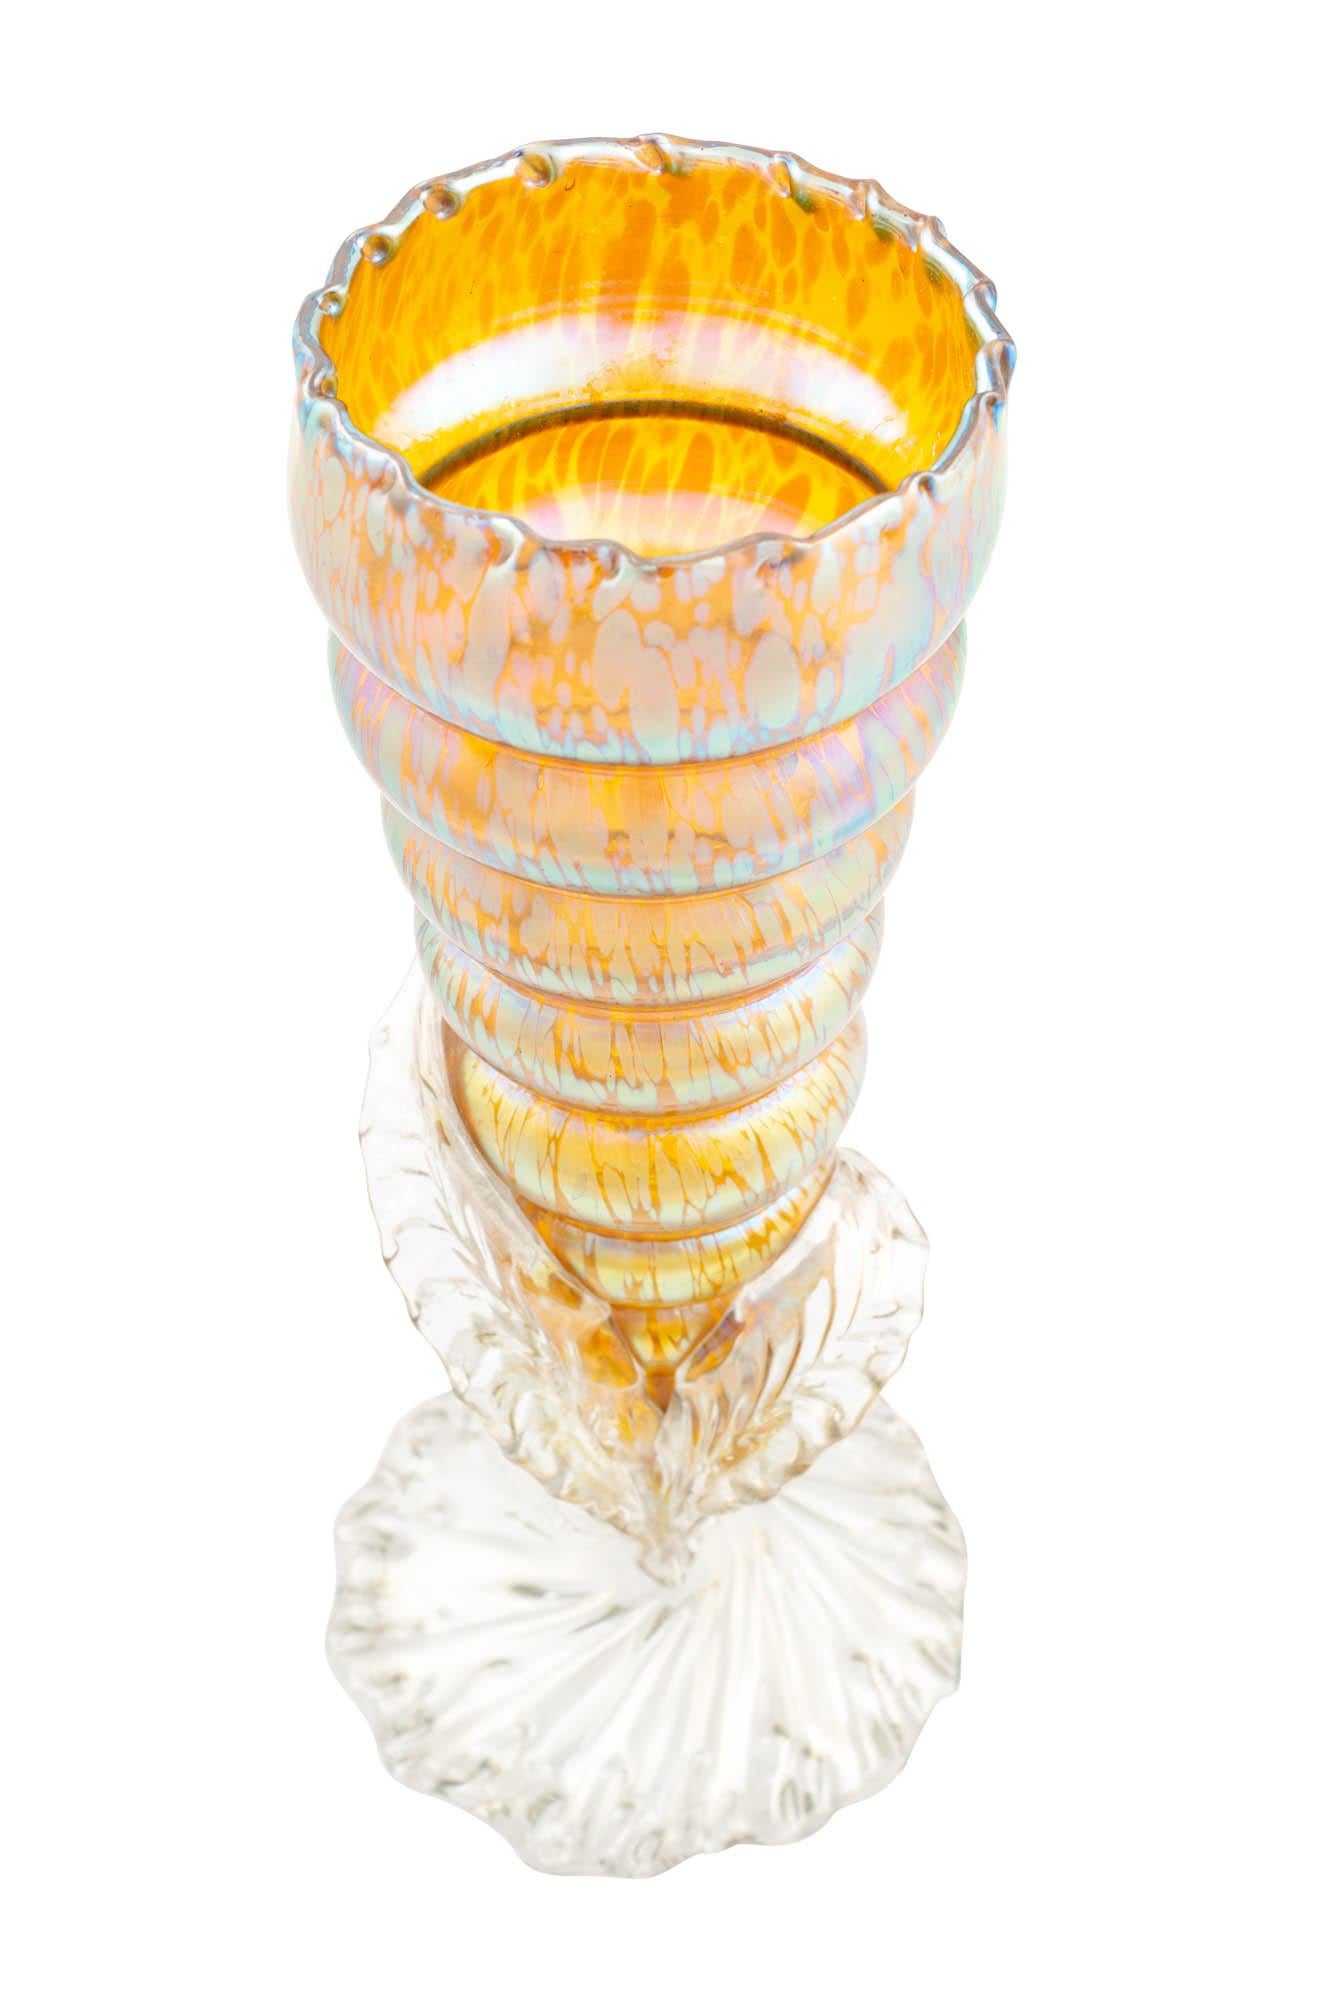 The conch shape was one of the most popular motifs of the naturalistic edition in the production of the Johann Loetz-Witwe glassworks. It was always produced in a very high quality. Shell-shaped vessels were produced in a wide variety of decor